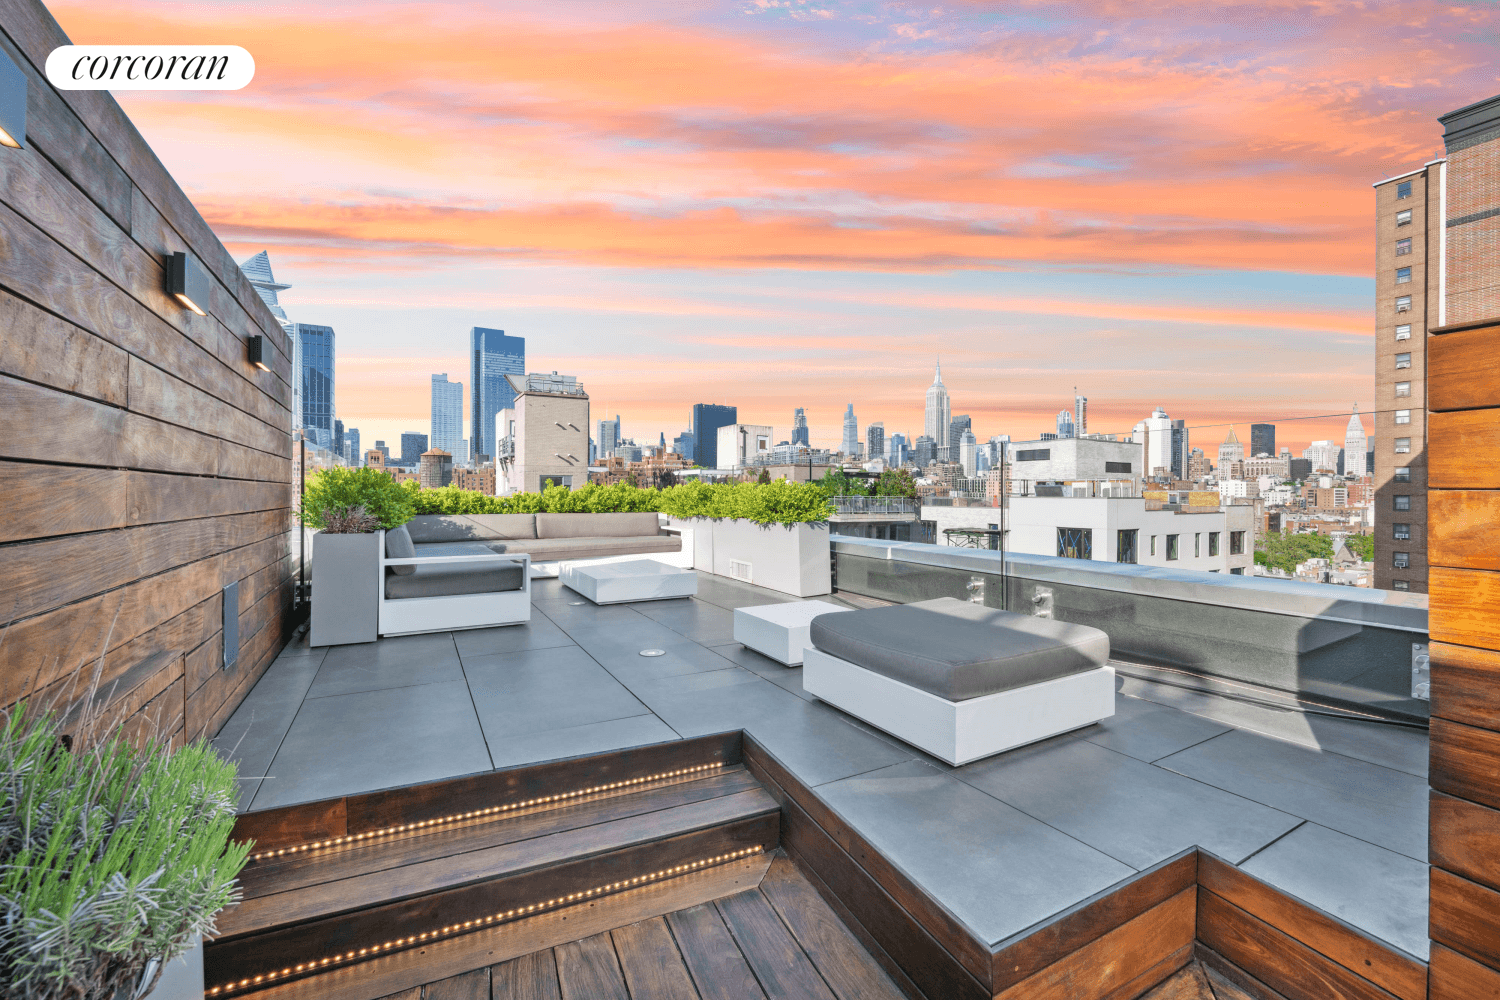 Newly renovated West Chelsea Penthouse with a highly coveted 883sqft large roof terrace with 360 degree Empire State and Downtown views is complete with a gas BBQ grill, outdoor Gagganau ...